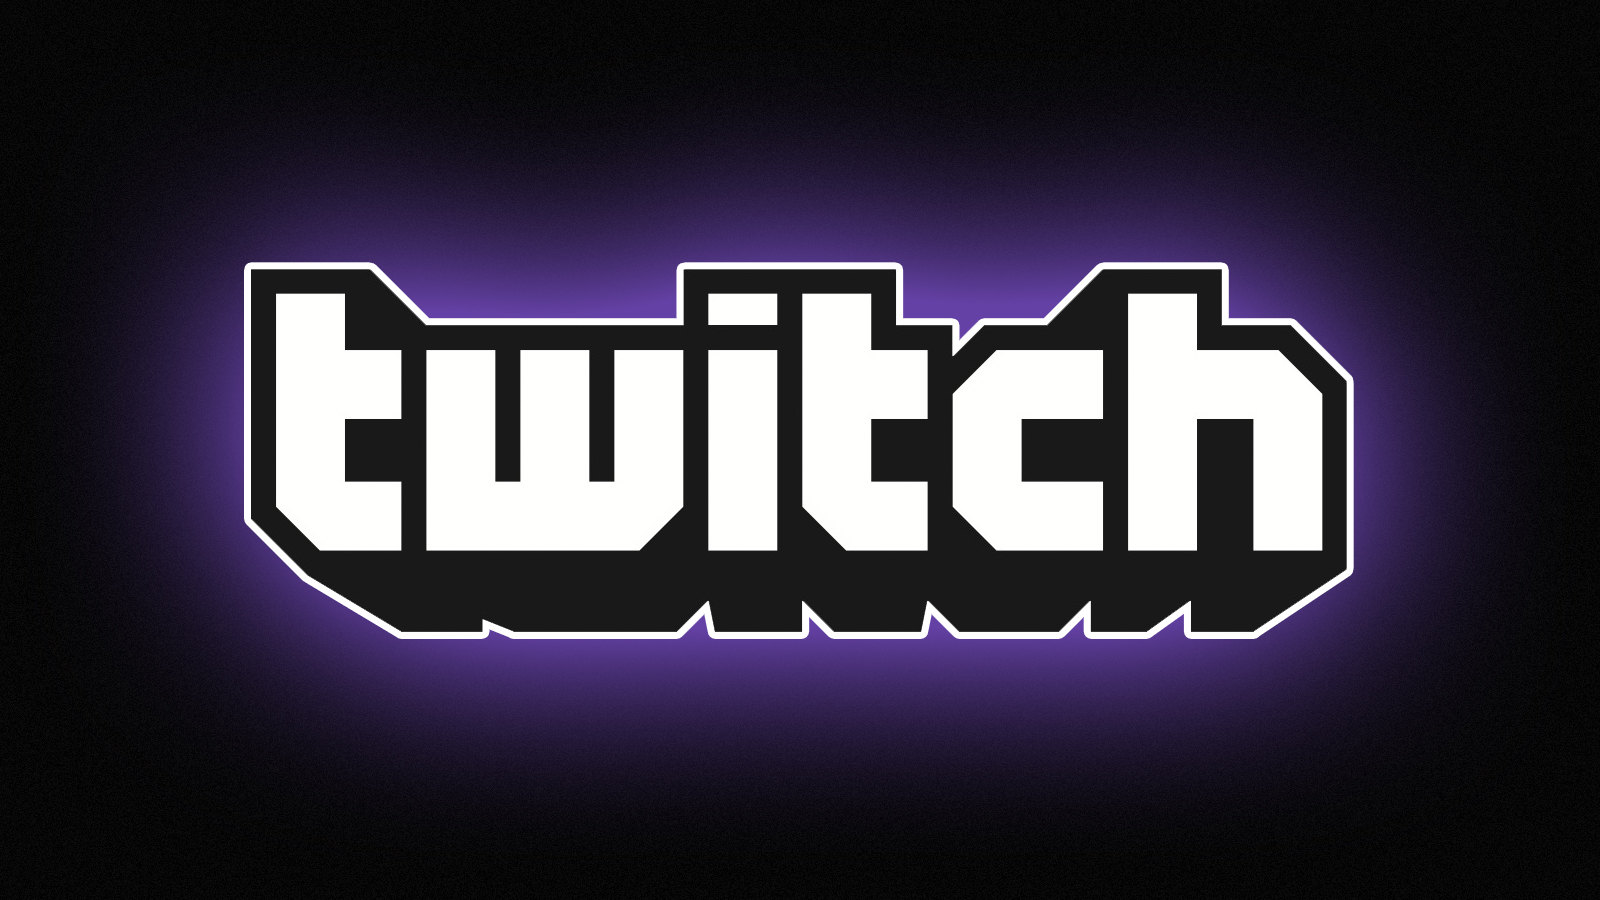 Emmett Shear, CEO of Twitch, announces his resignation to spend more time with his family